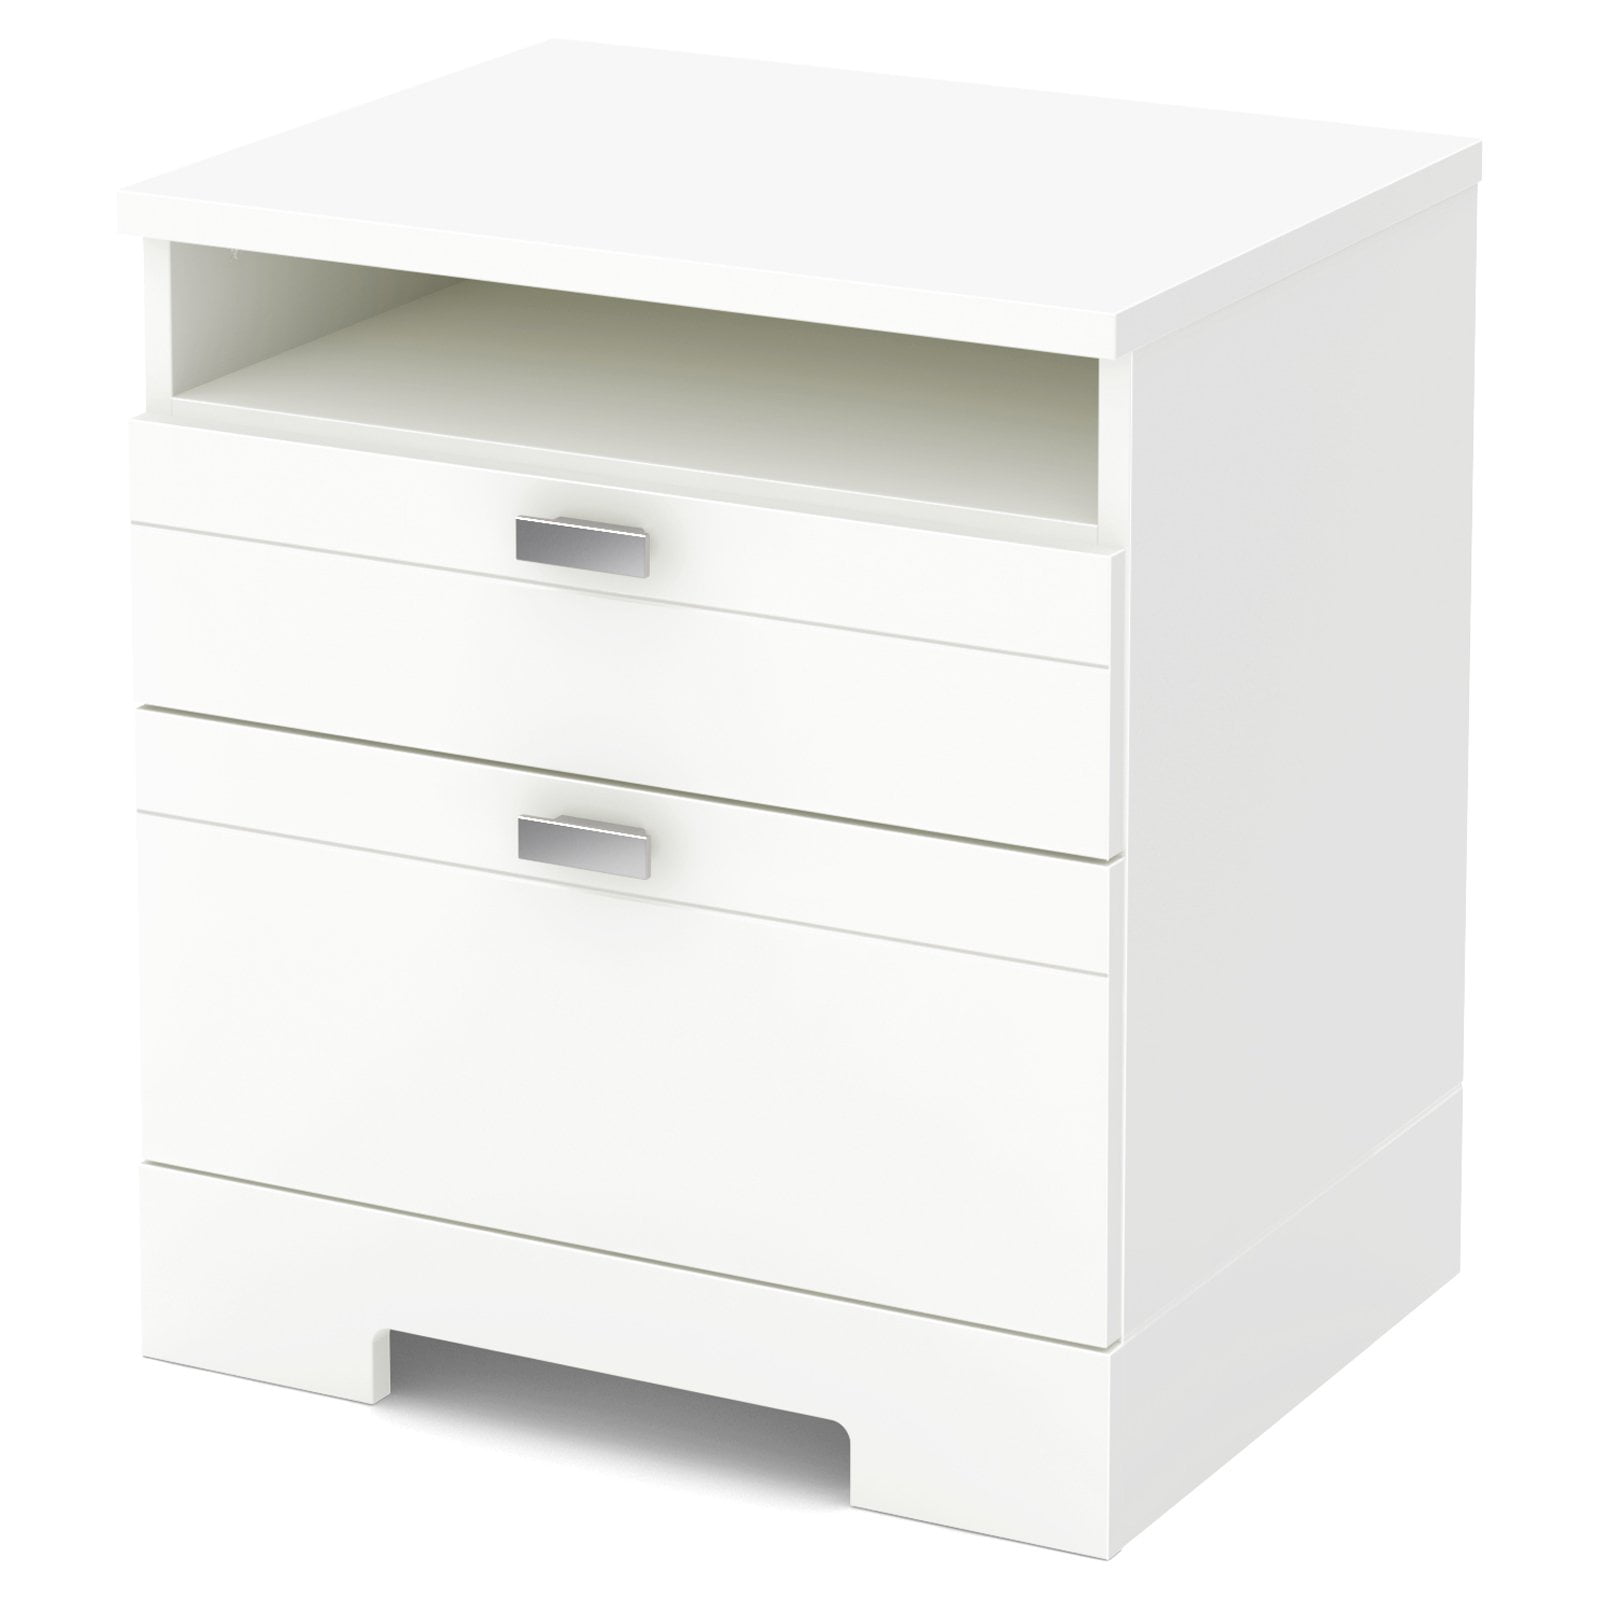 South Shore Furniture 12417 Step One Essential 2-Drawer Nightstand-Gray Oak